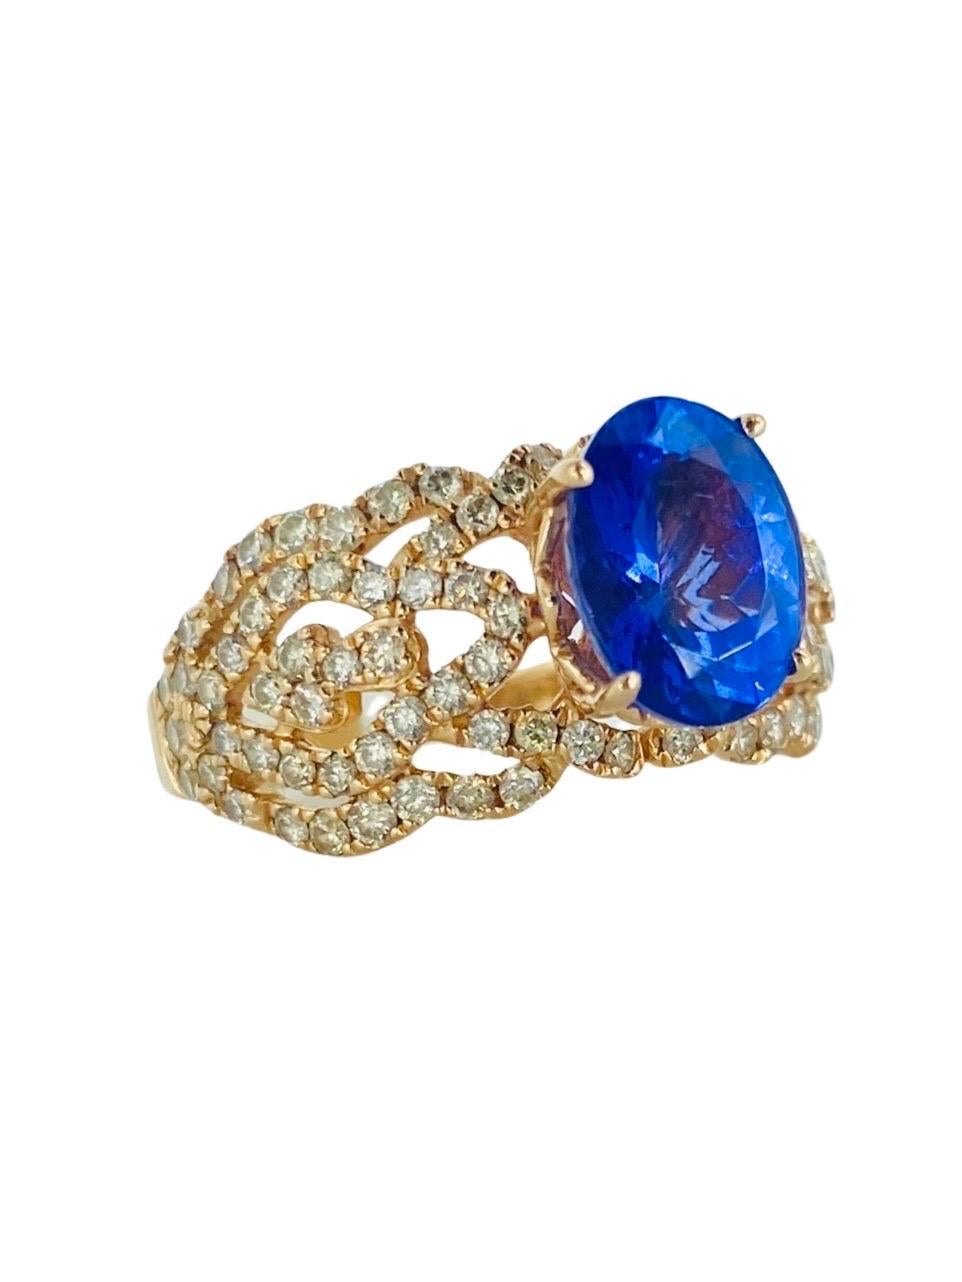 LeVian 2.90 Carat Tanzanite and Diamonds Statement Ring 14k Rose Gold In Excellent Condition For Sale In Miami, FL